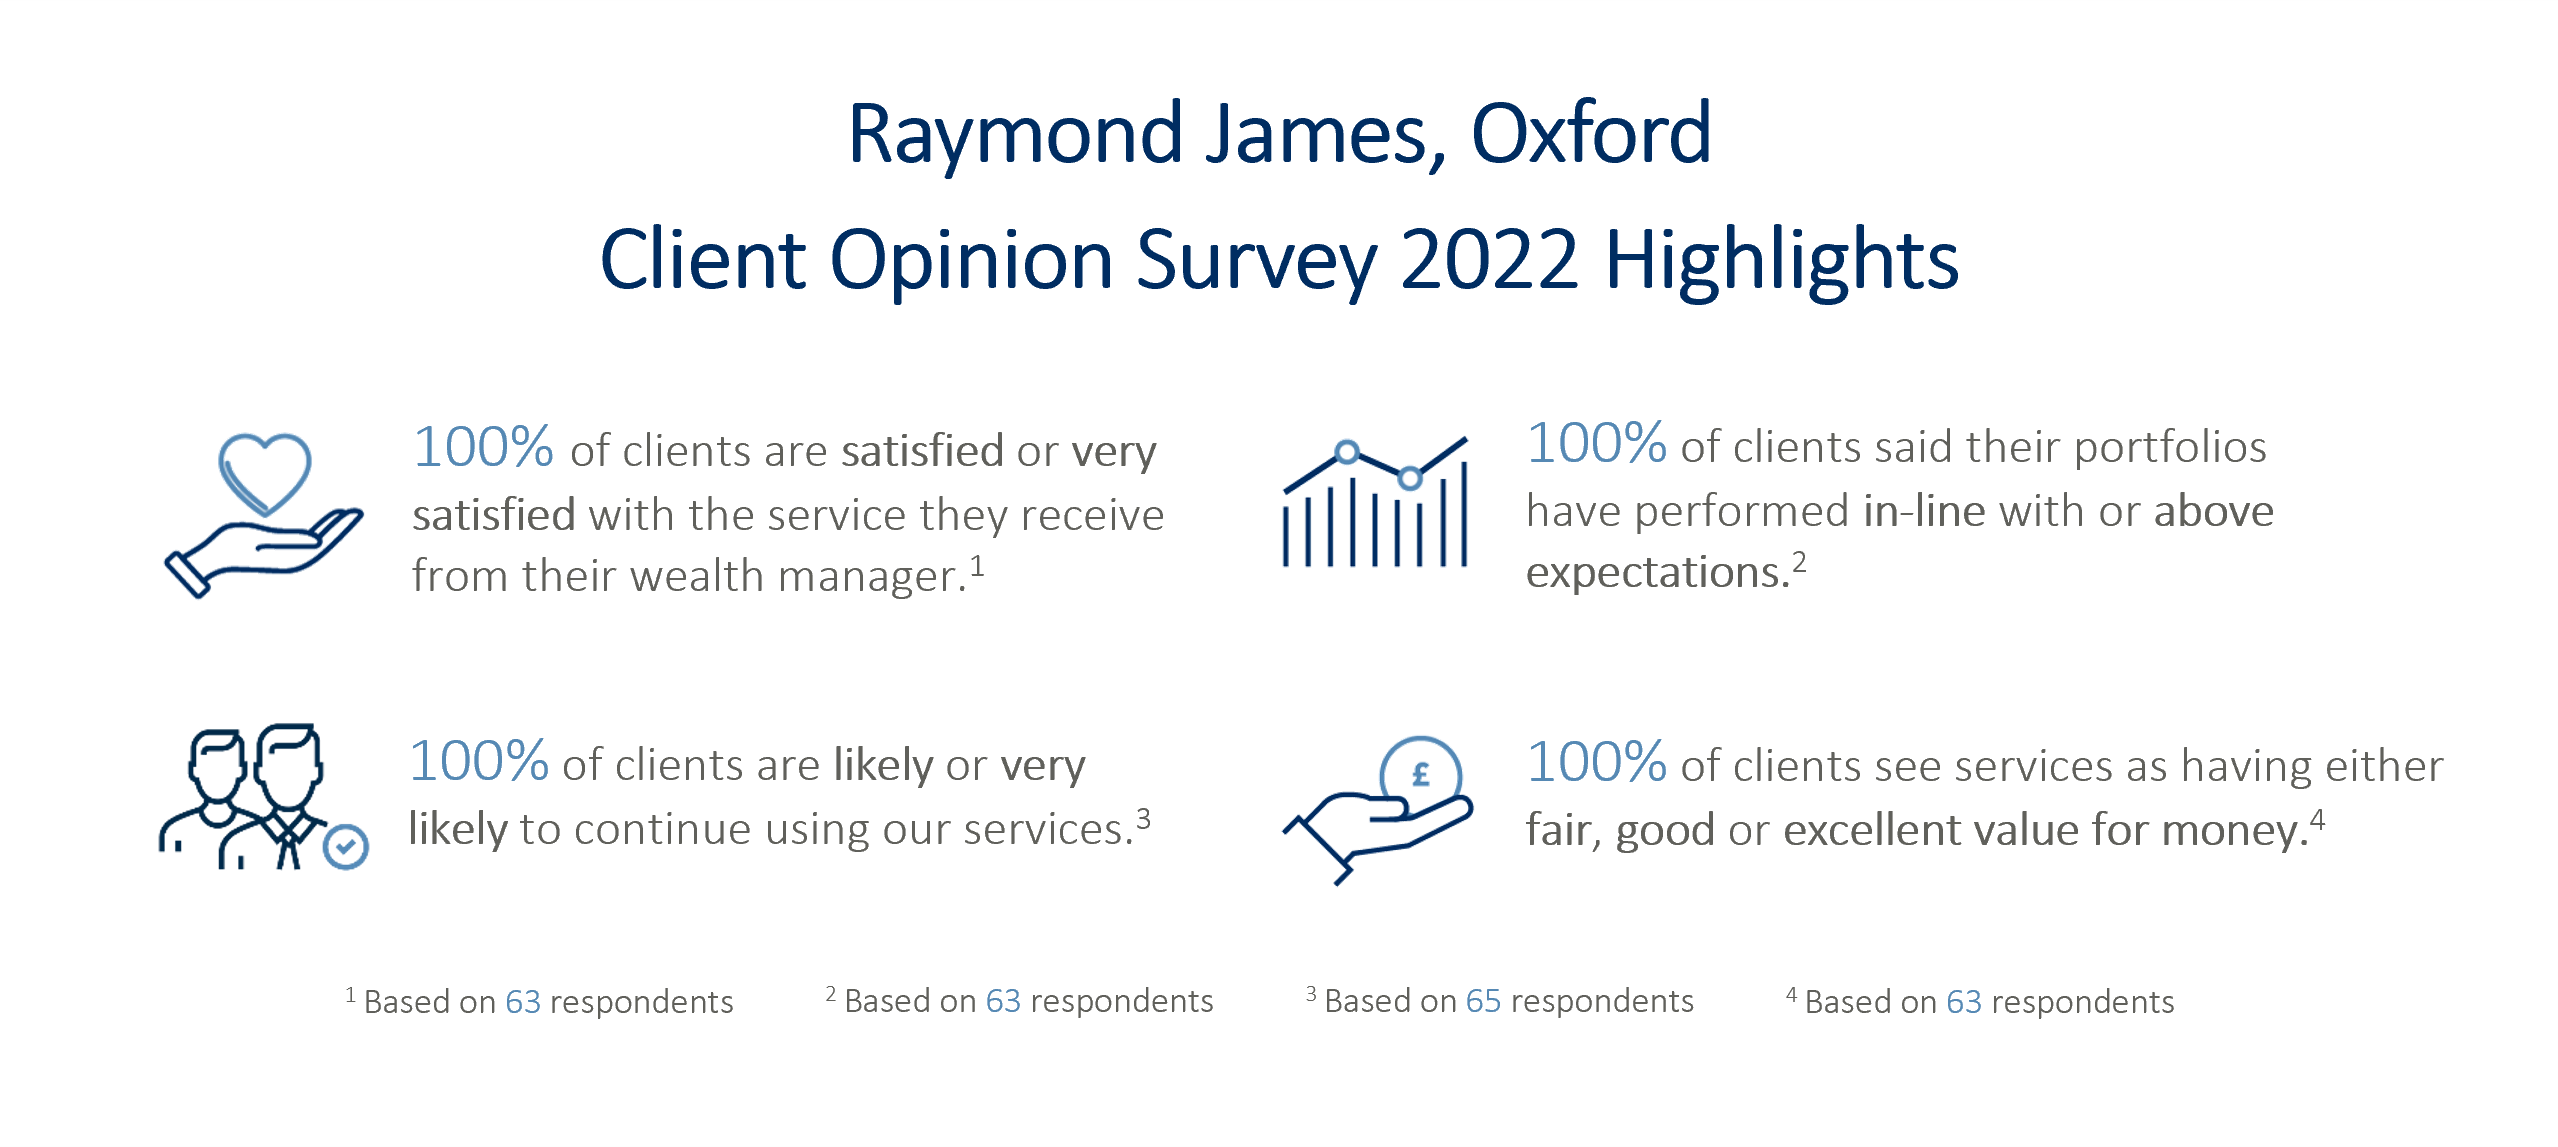 Client Opinion Survey Highlights 2022